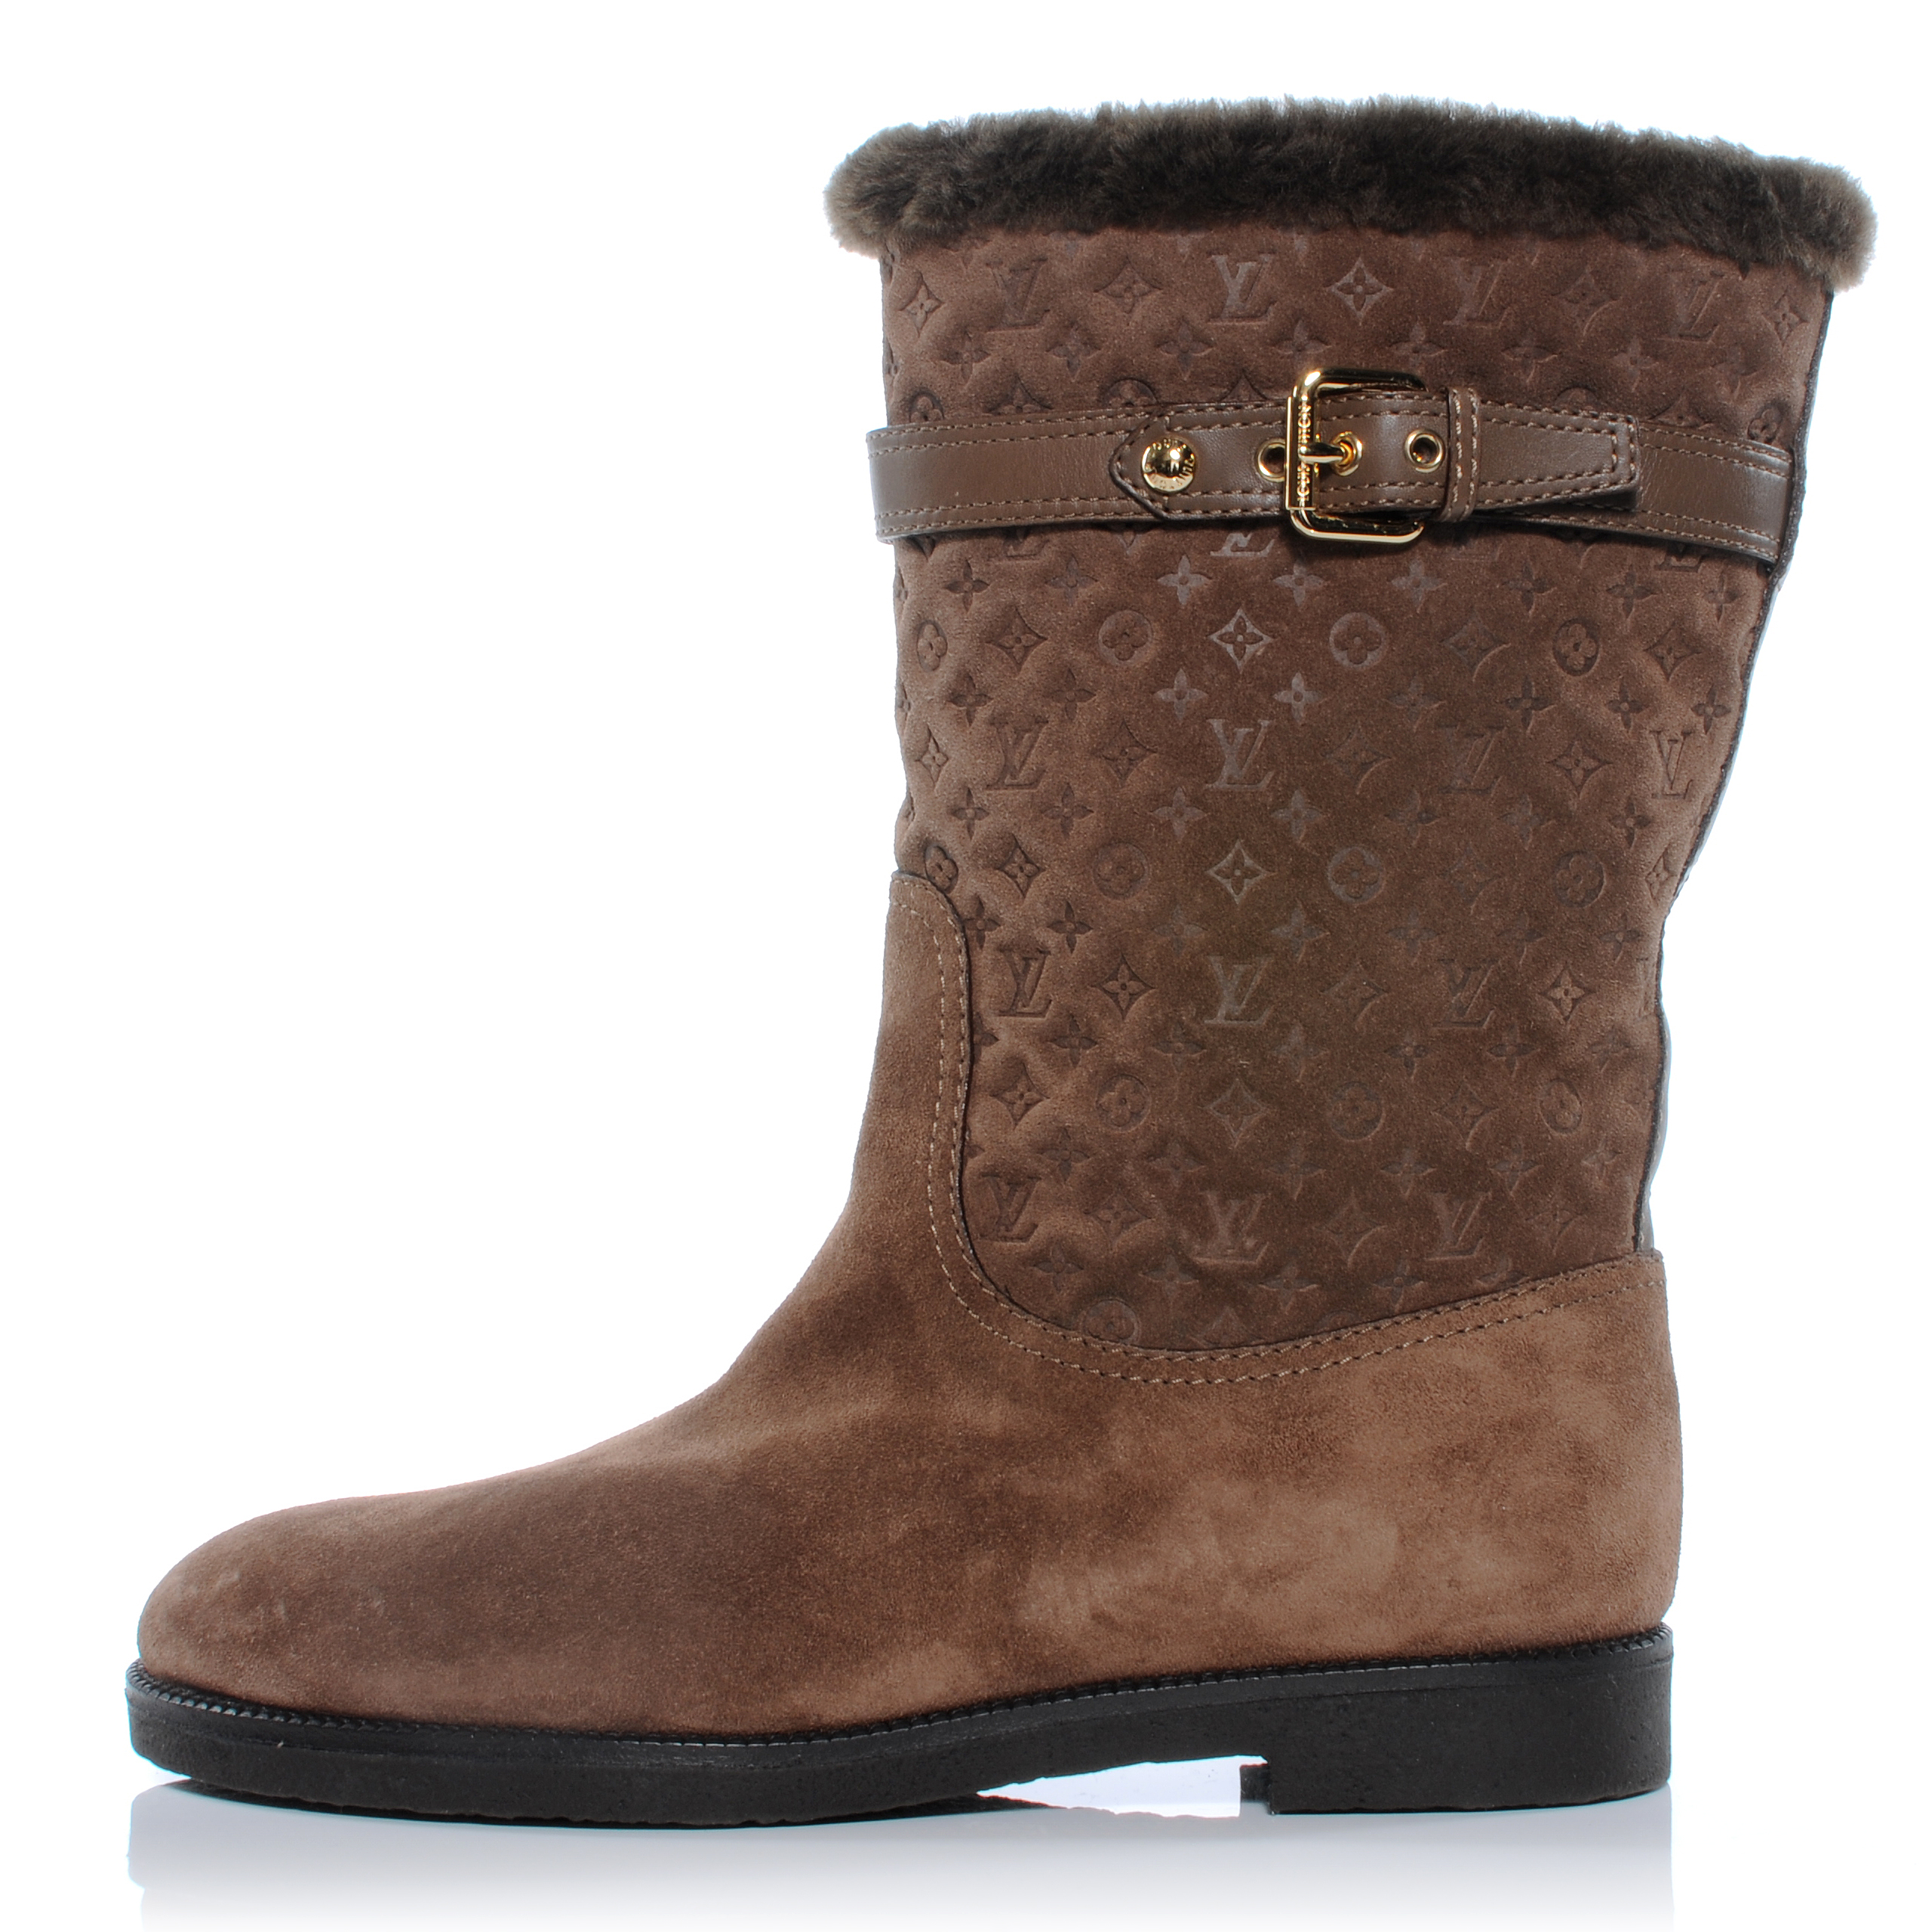 LOUIS VUITTON Suede Fur Wintry Boots 41 Brown 40586